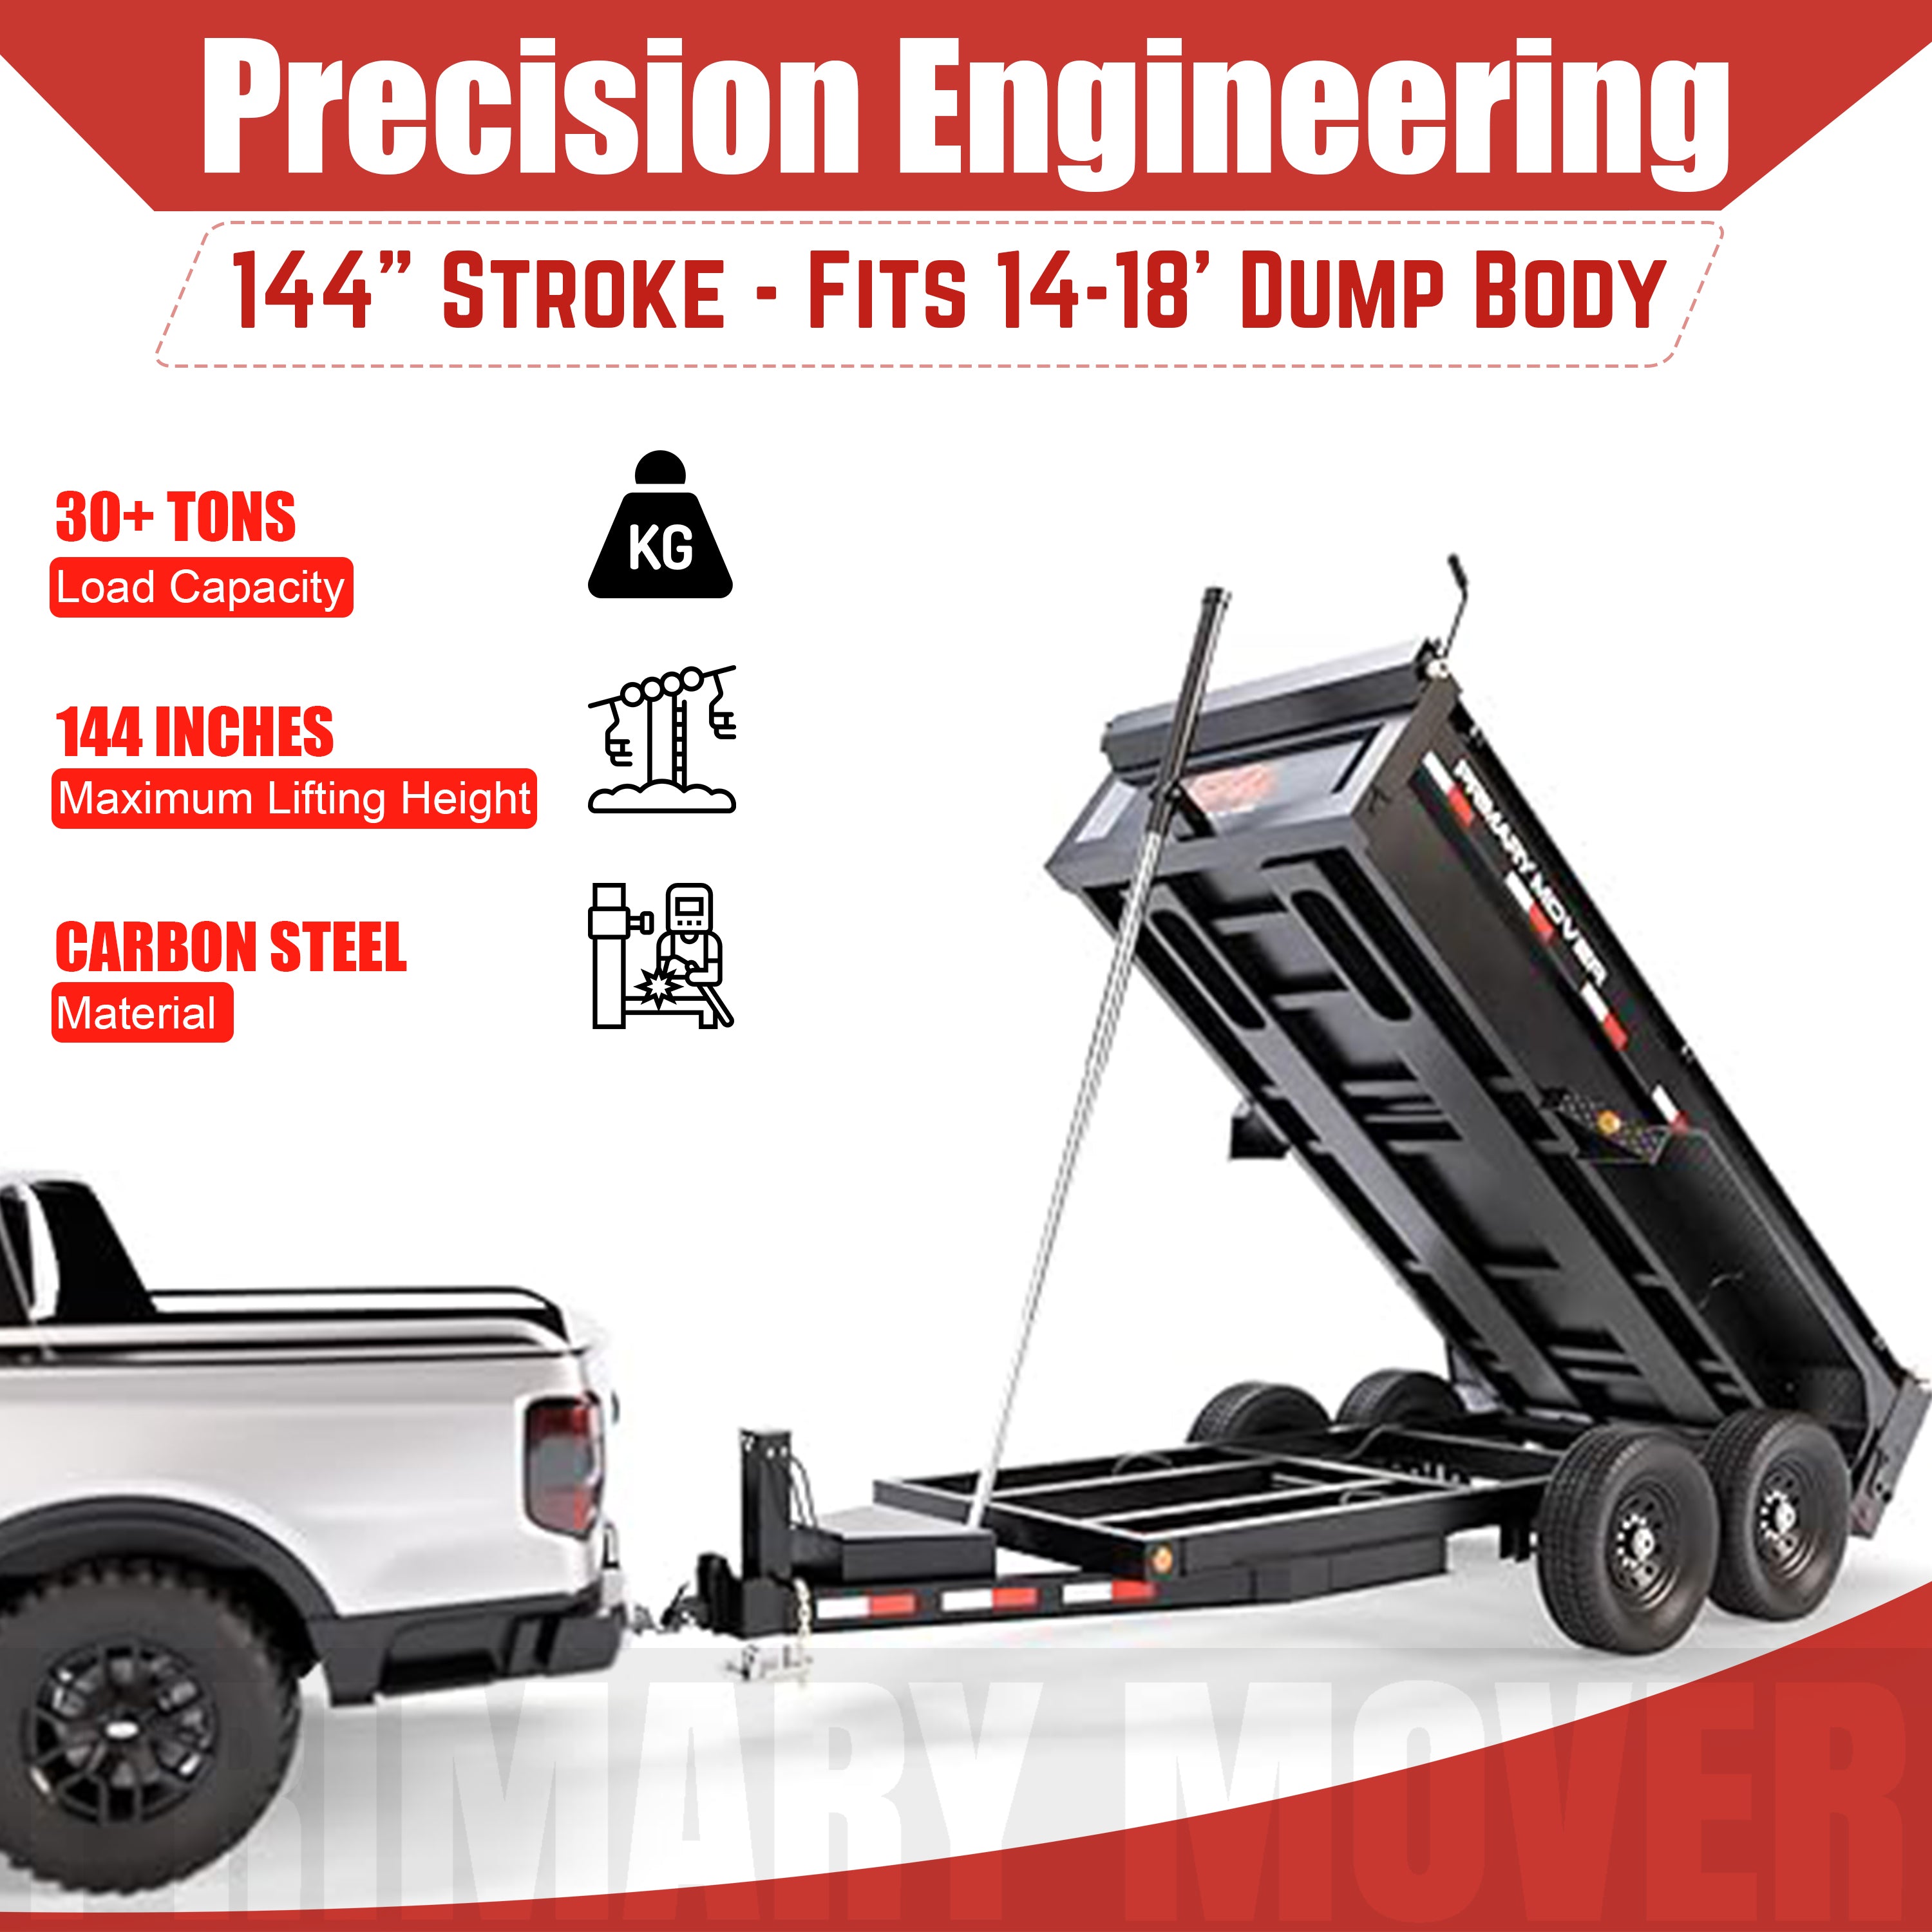 Telescopic Dump Trailer Cylinder Kit - 30 Ton Capacity - 144 Stroke, shown attached to a white truck and black trailer, ideal for 14-18' dump beds.